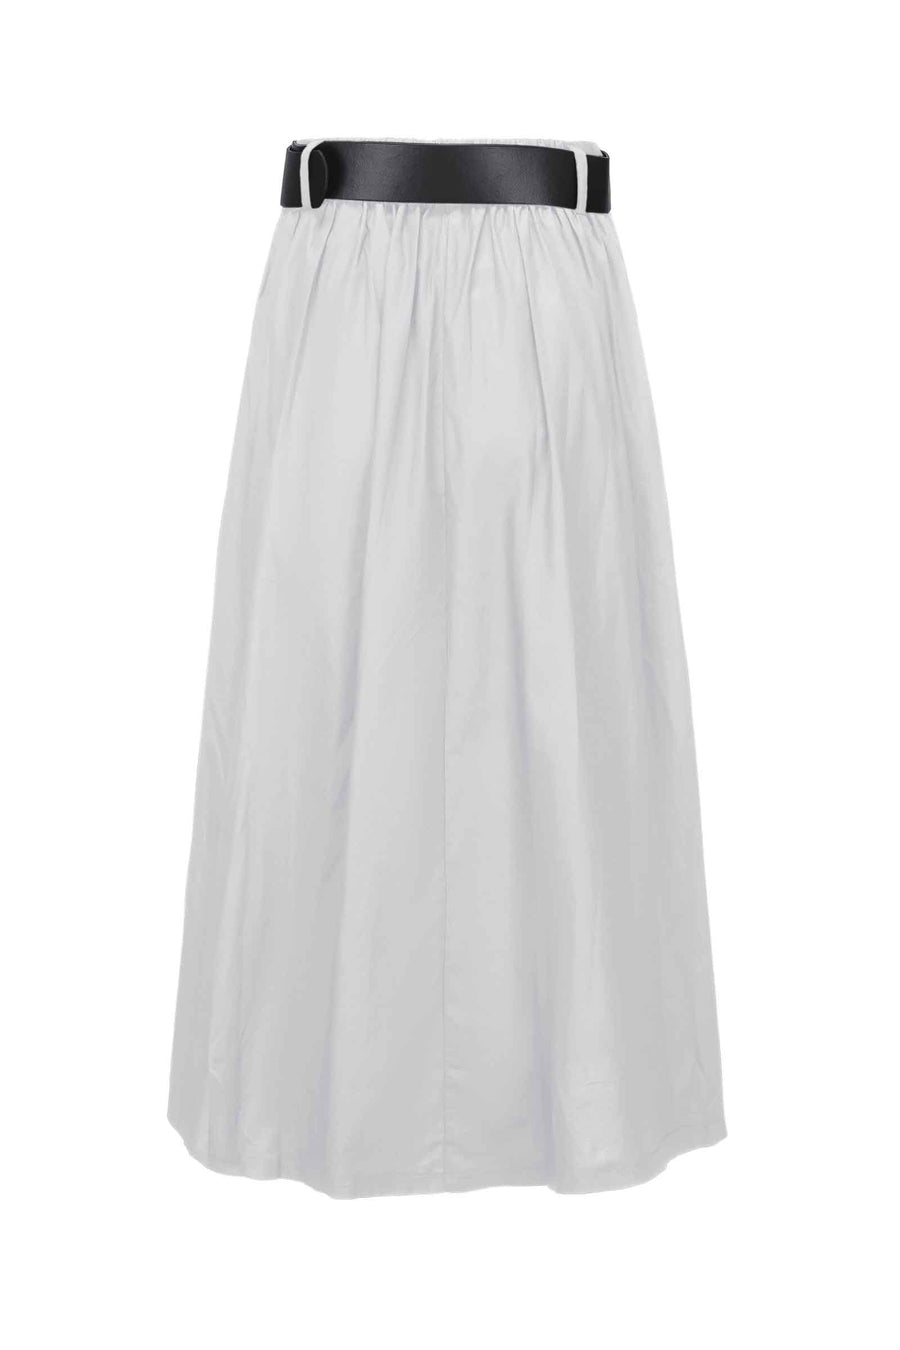 Darcy Belted Skirt - White